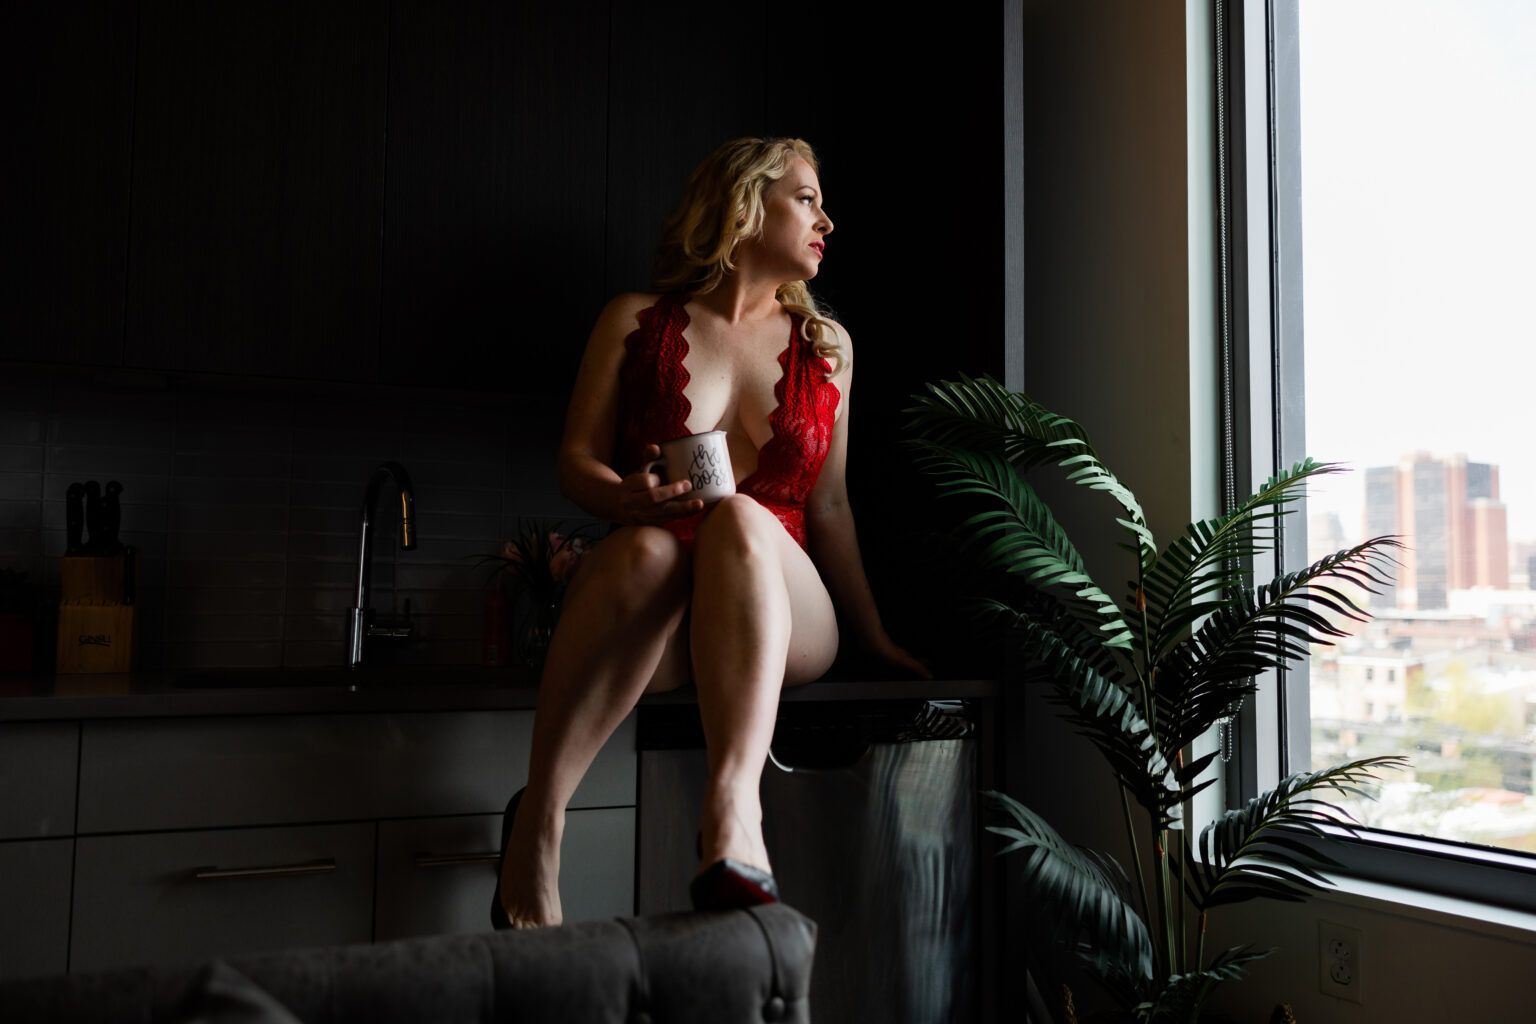 Laura M. Turner Boudoir photographer located in Central PA. York Pa, Photographer